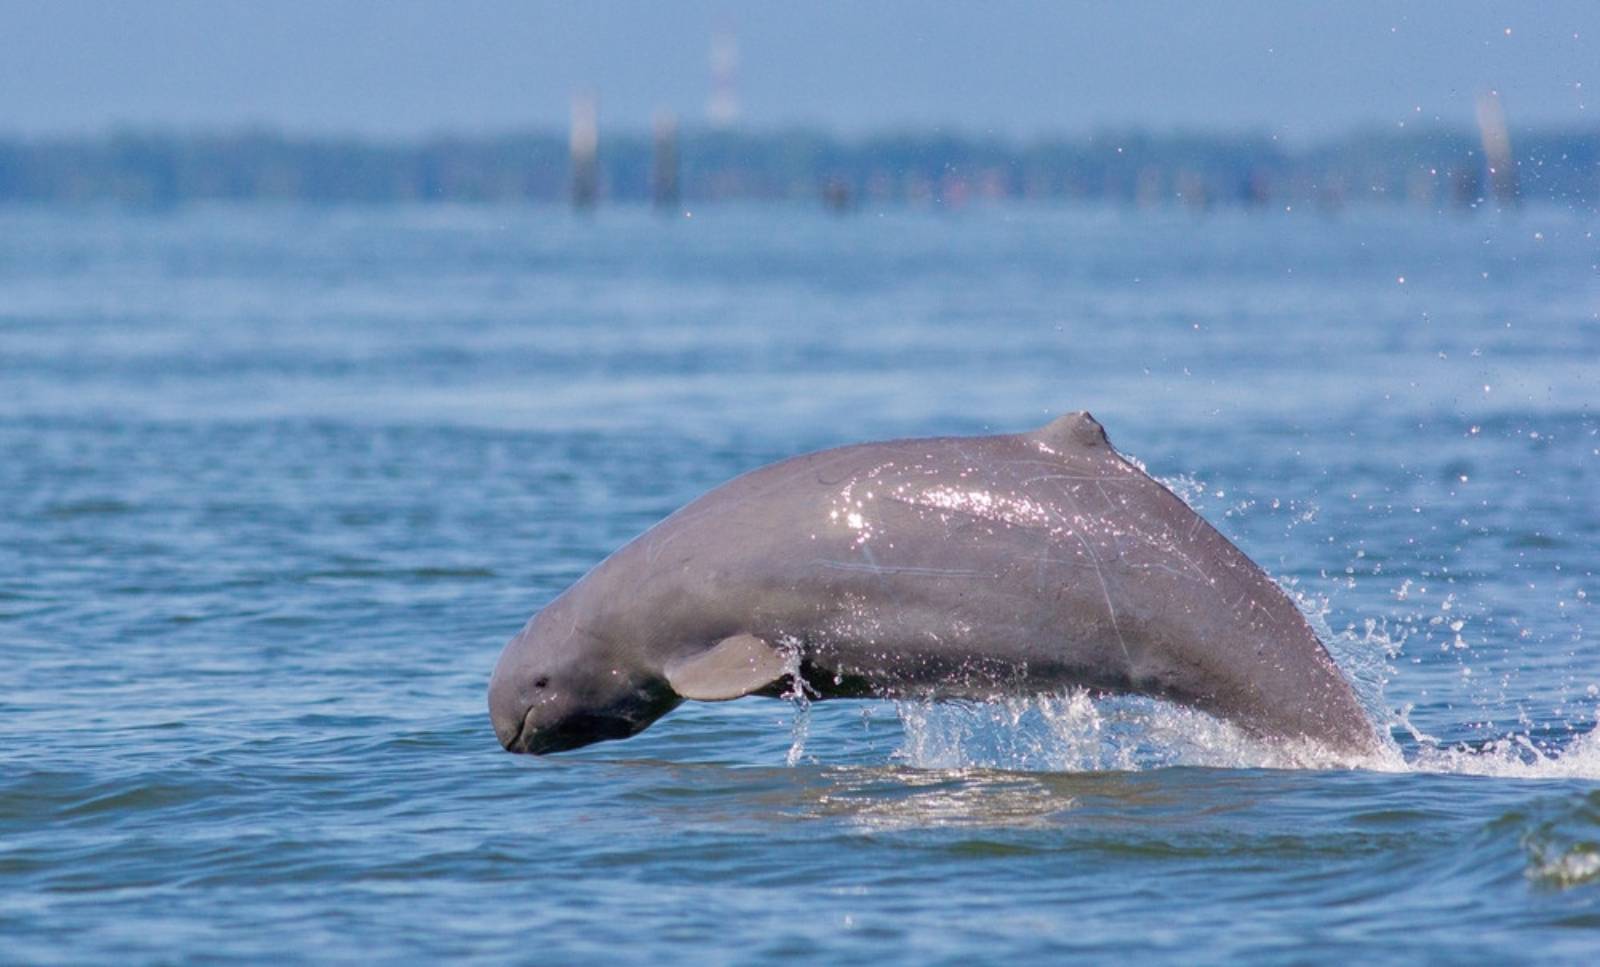 The unique Mekong Irrawaddy Dolphin